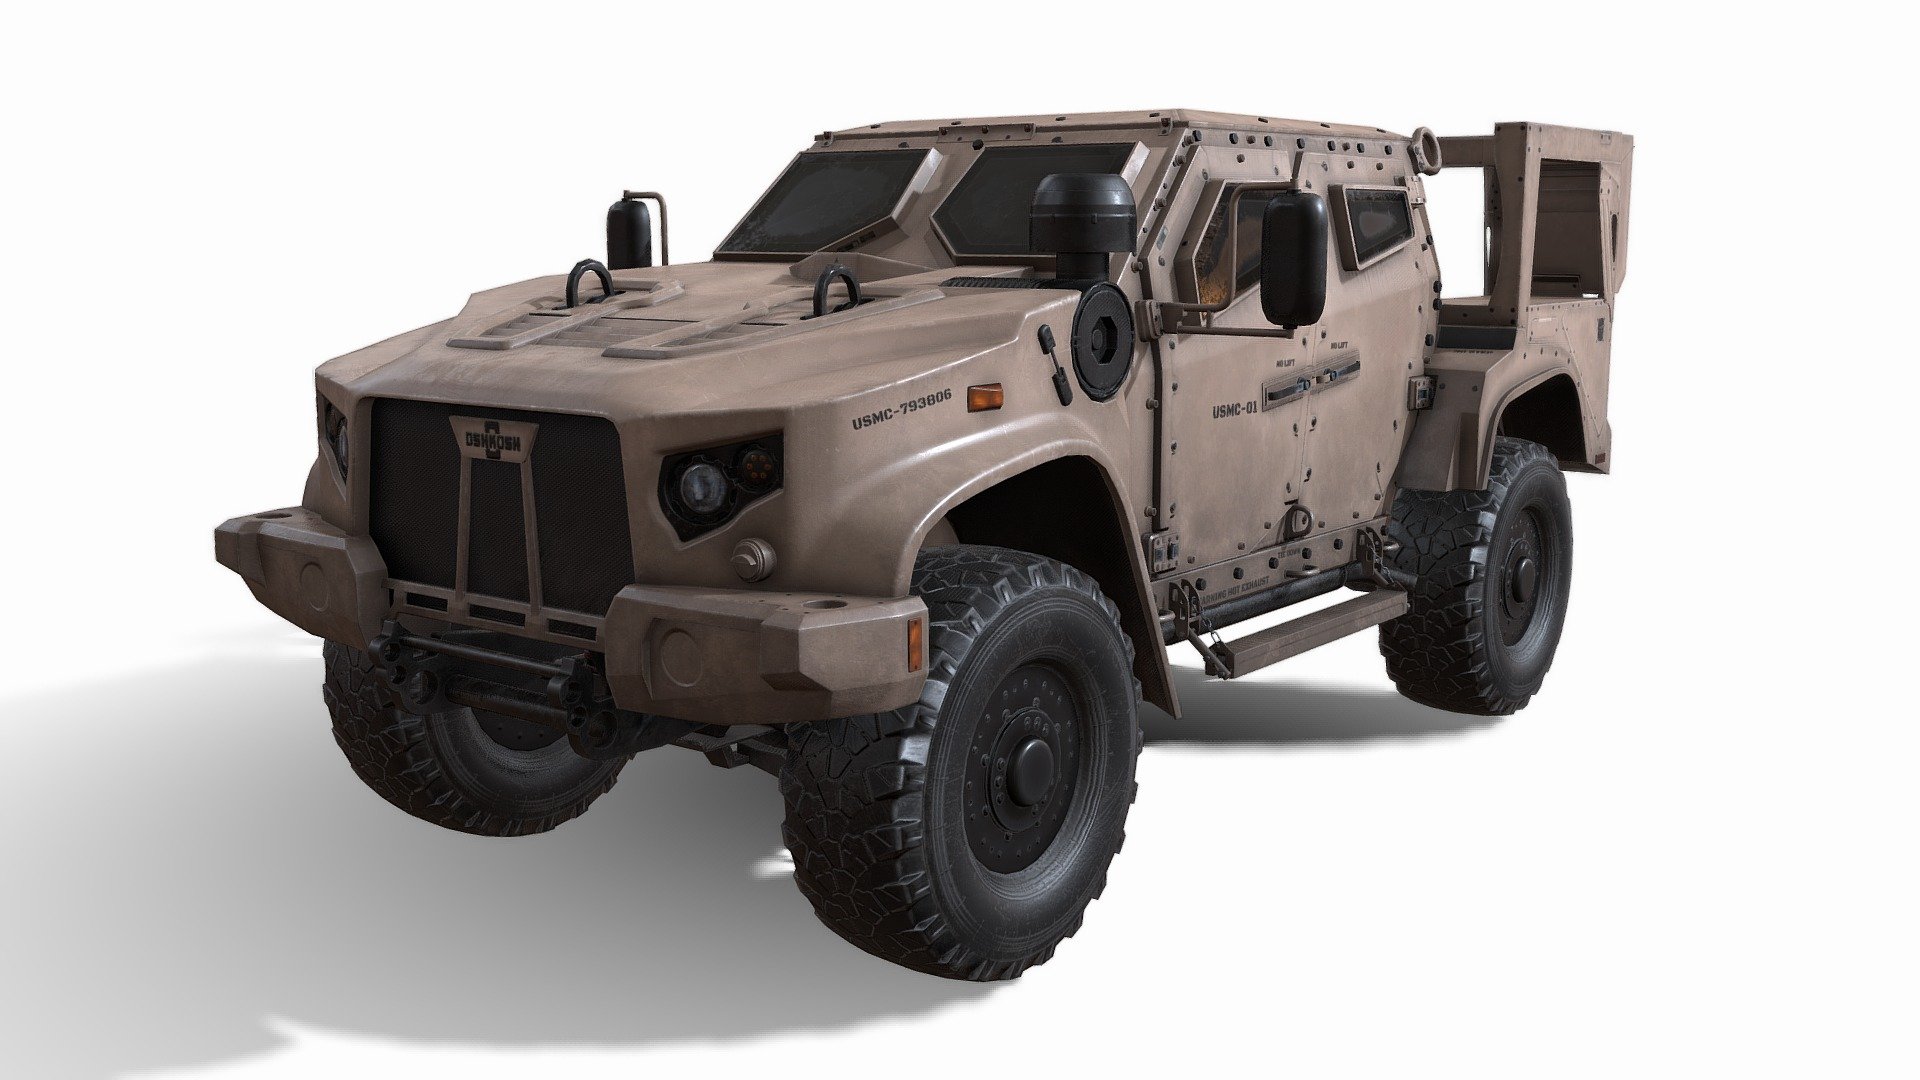 low poly 3d models of US military vehicle Oshkosh JLTV

INCLUDE: Olive Camo, Wood Camo

NO INTERIOR

Polycount:




Tris: 56 942

Texture sets:




4096x4096 (Front-body)

4096x4096 (Back-body)

1024x1024 (wheels)
 - Oshkosh JLTV - Buy Royalty Free 3D model by Vlad model's (@a3flife) 3d model